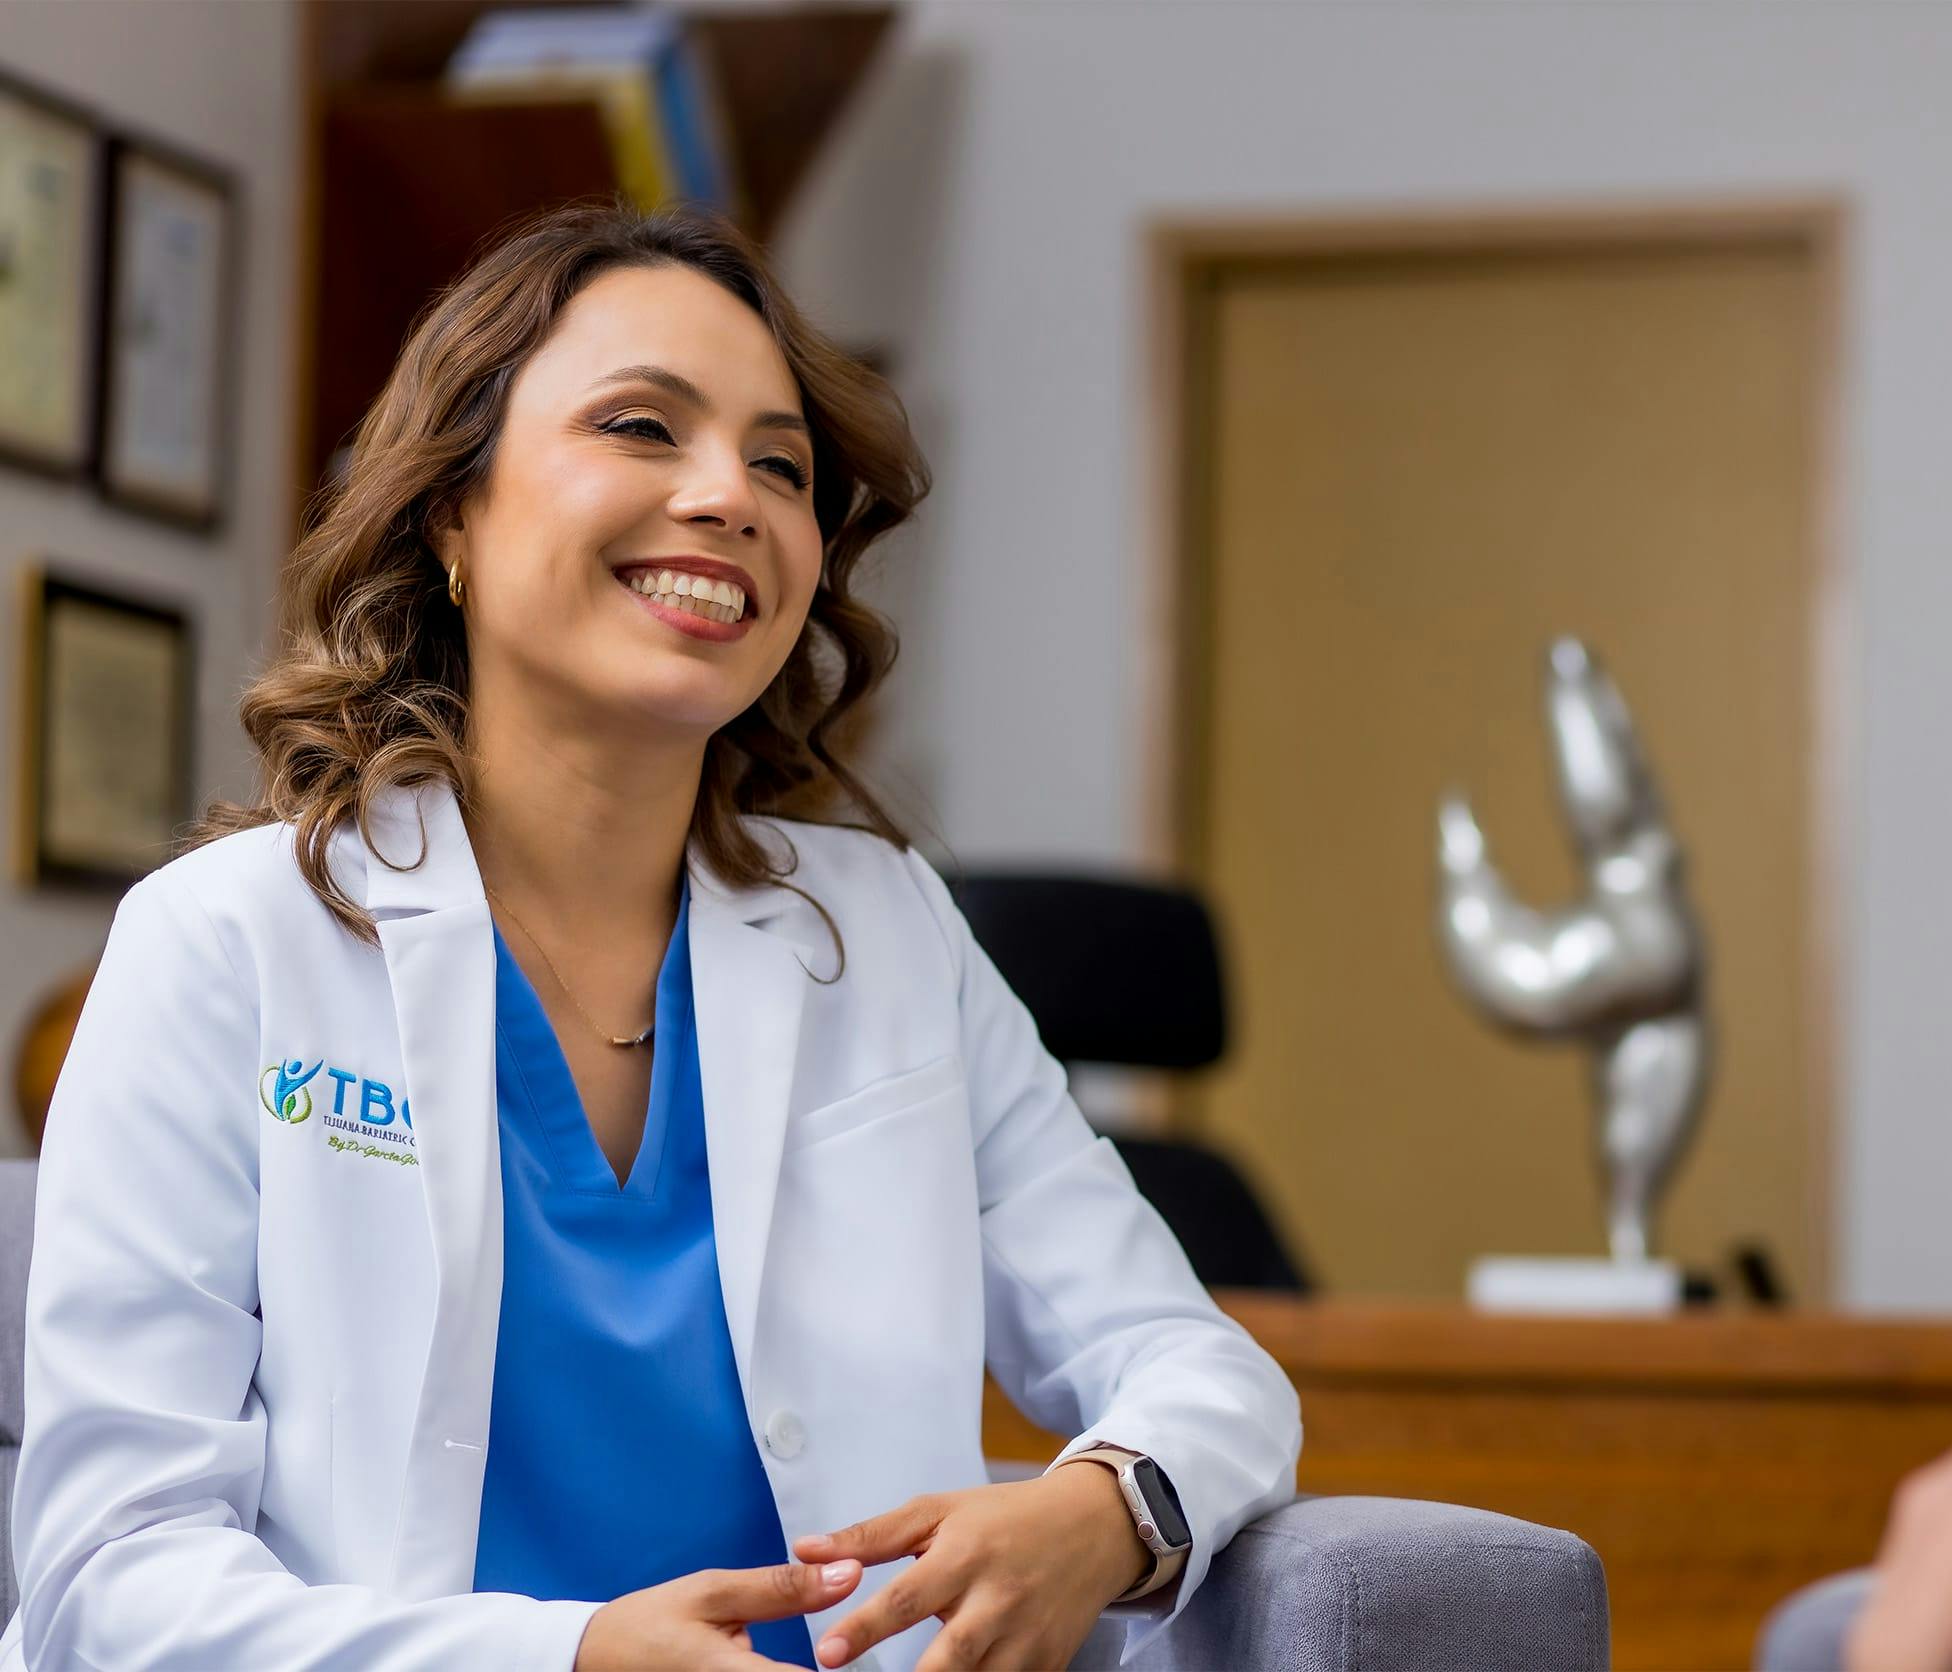 Dr. Marcela Olague smiling and sitting in her office